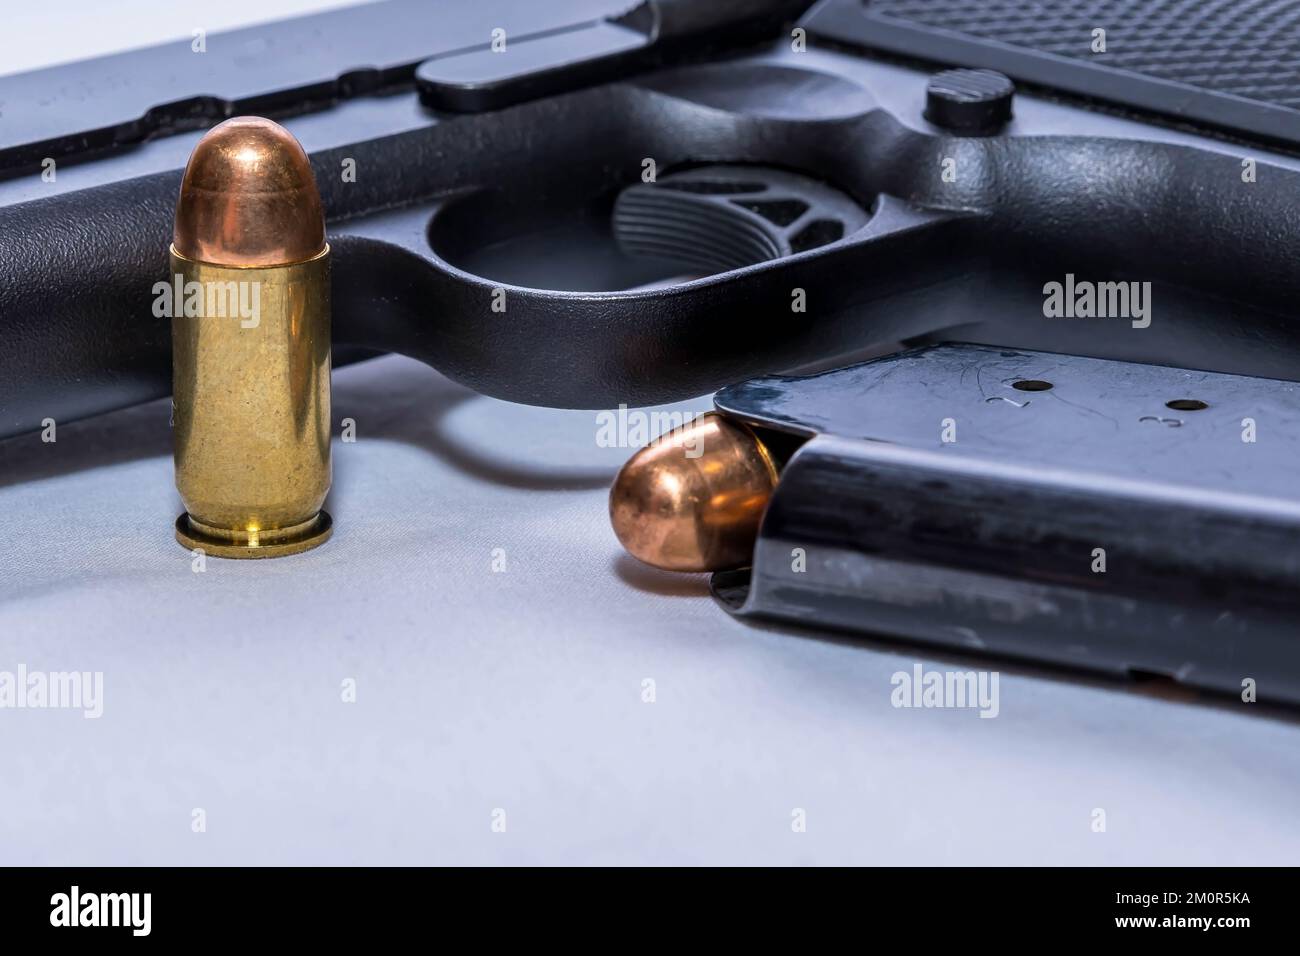 A black 45 caliber pistol a loaded magazine next it and an extra bullet on a white background Stock Photo